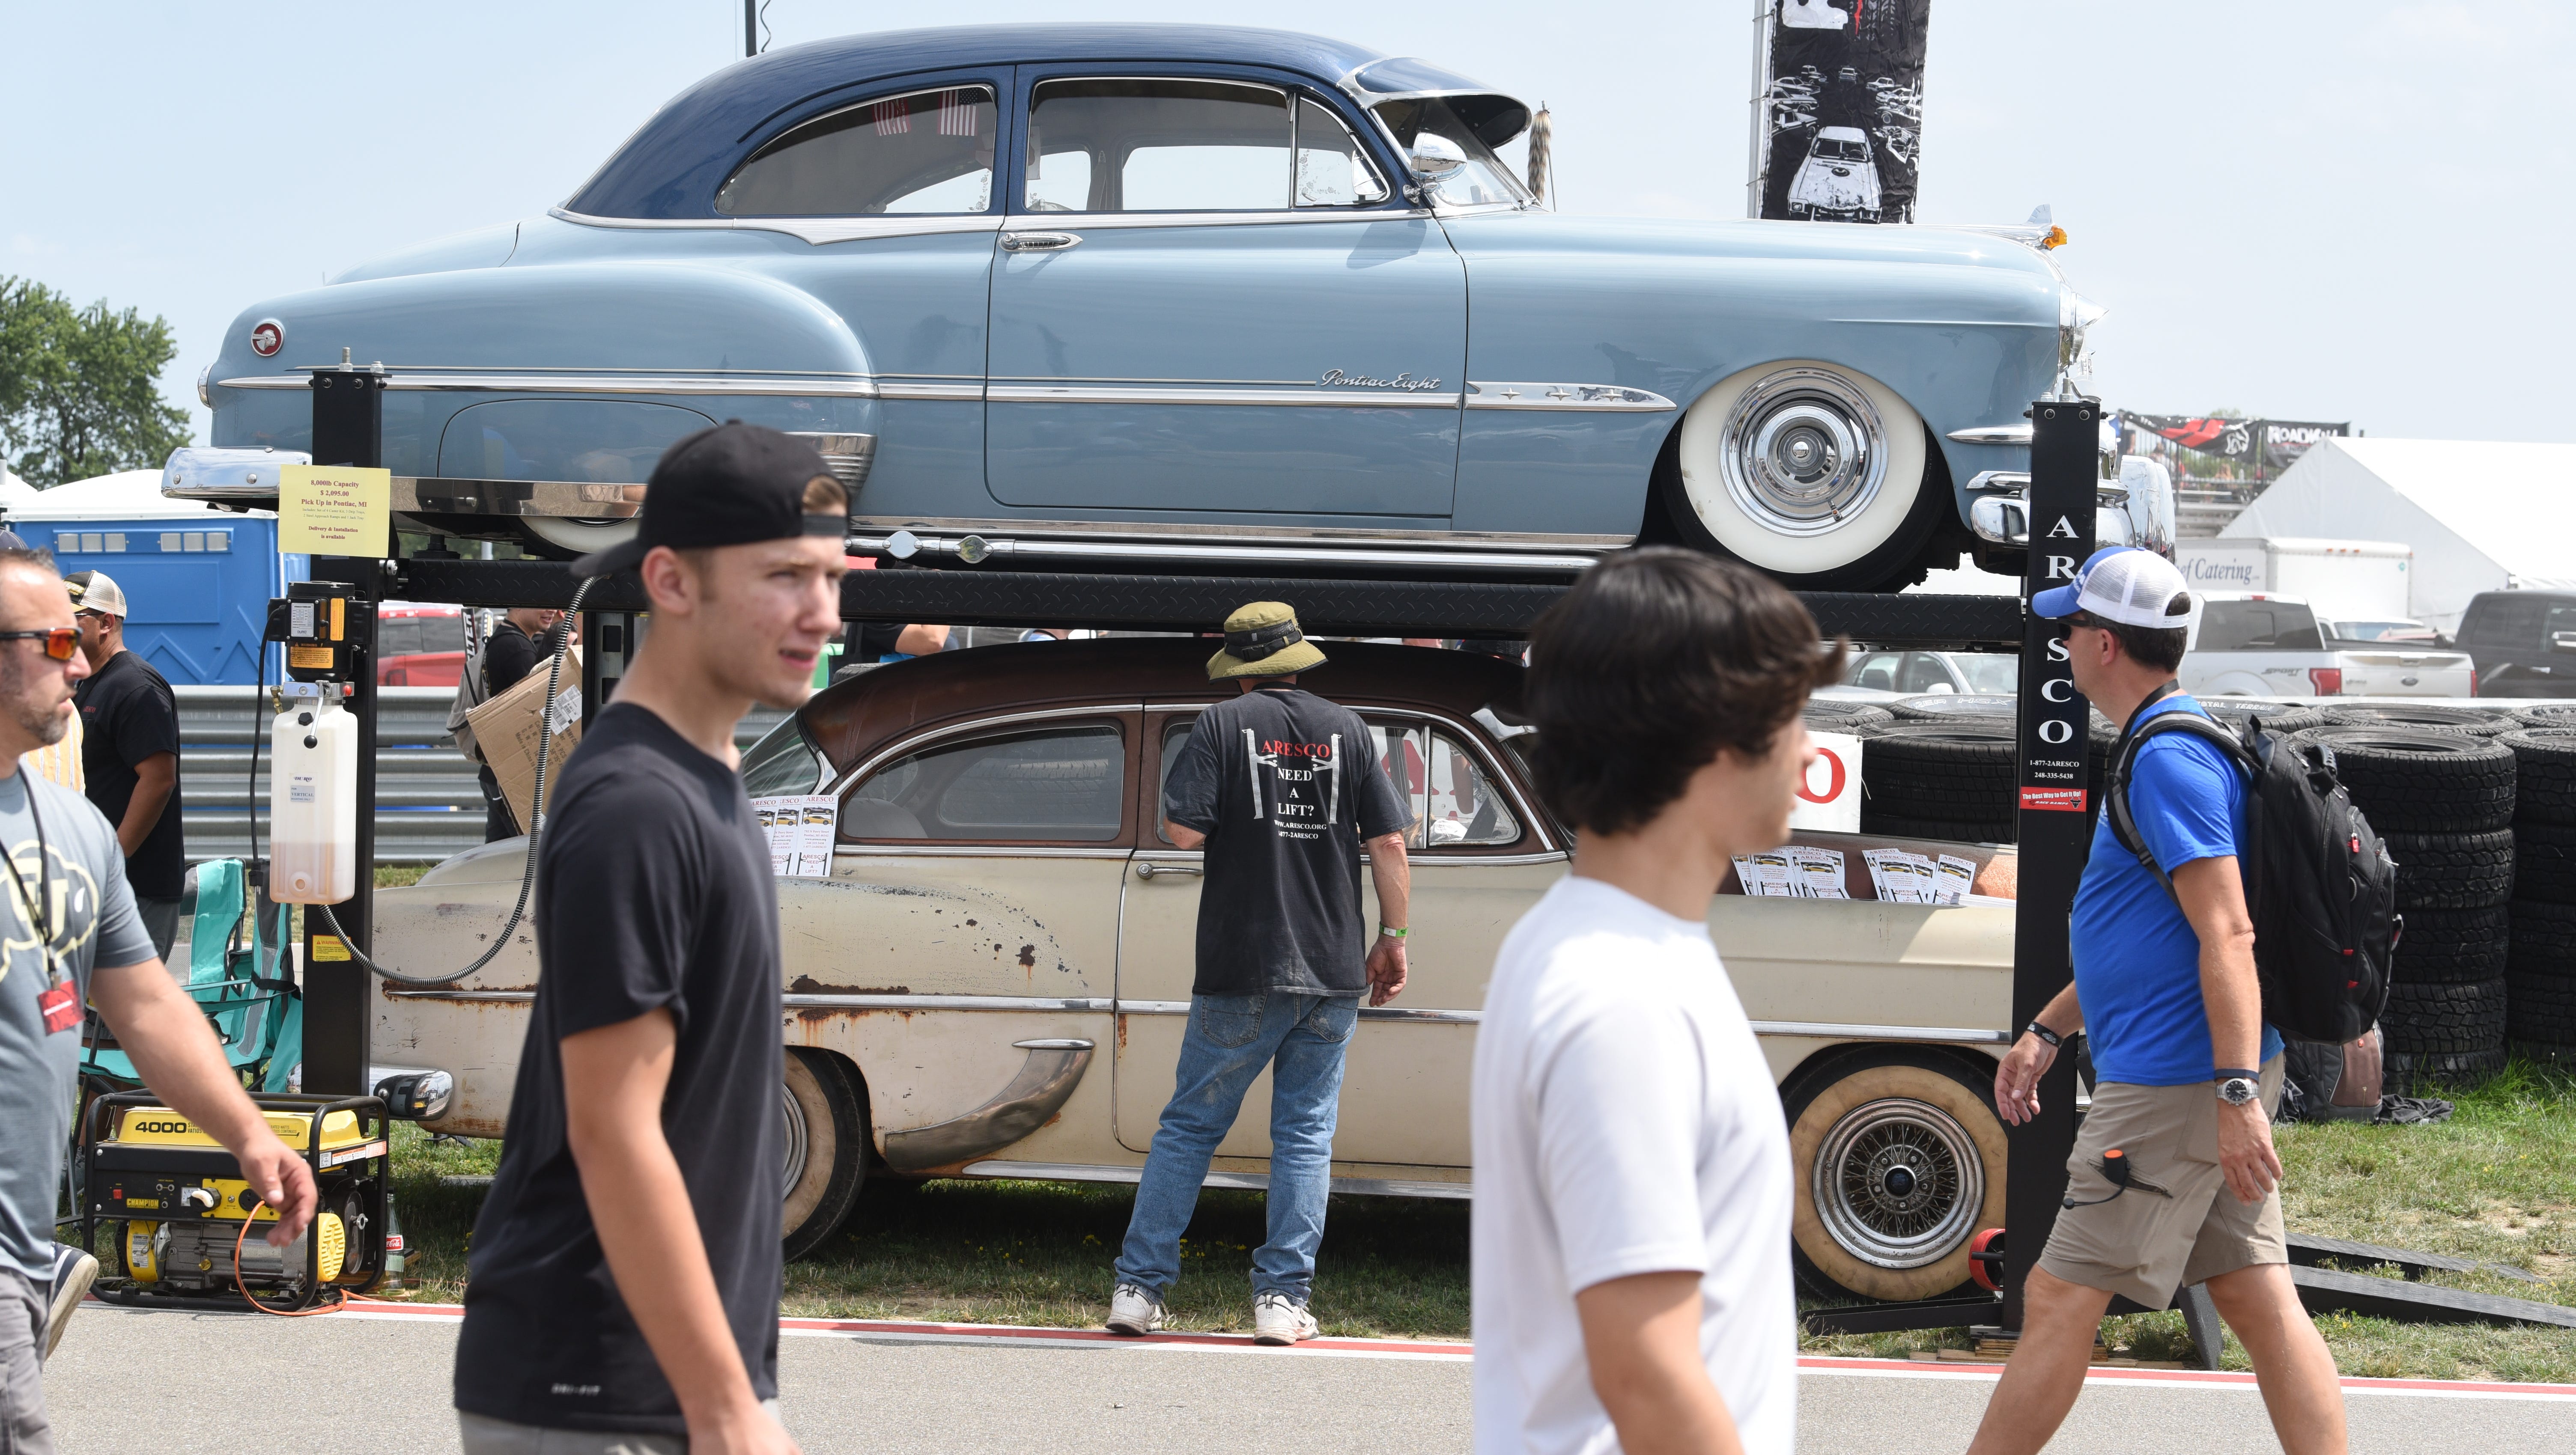 Fans look at classic Chevy cars stacked during the Roadkill Nights event in Pontiac on Saturday, August 11, 2018